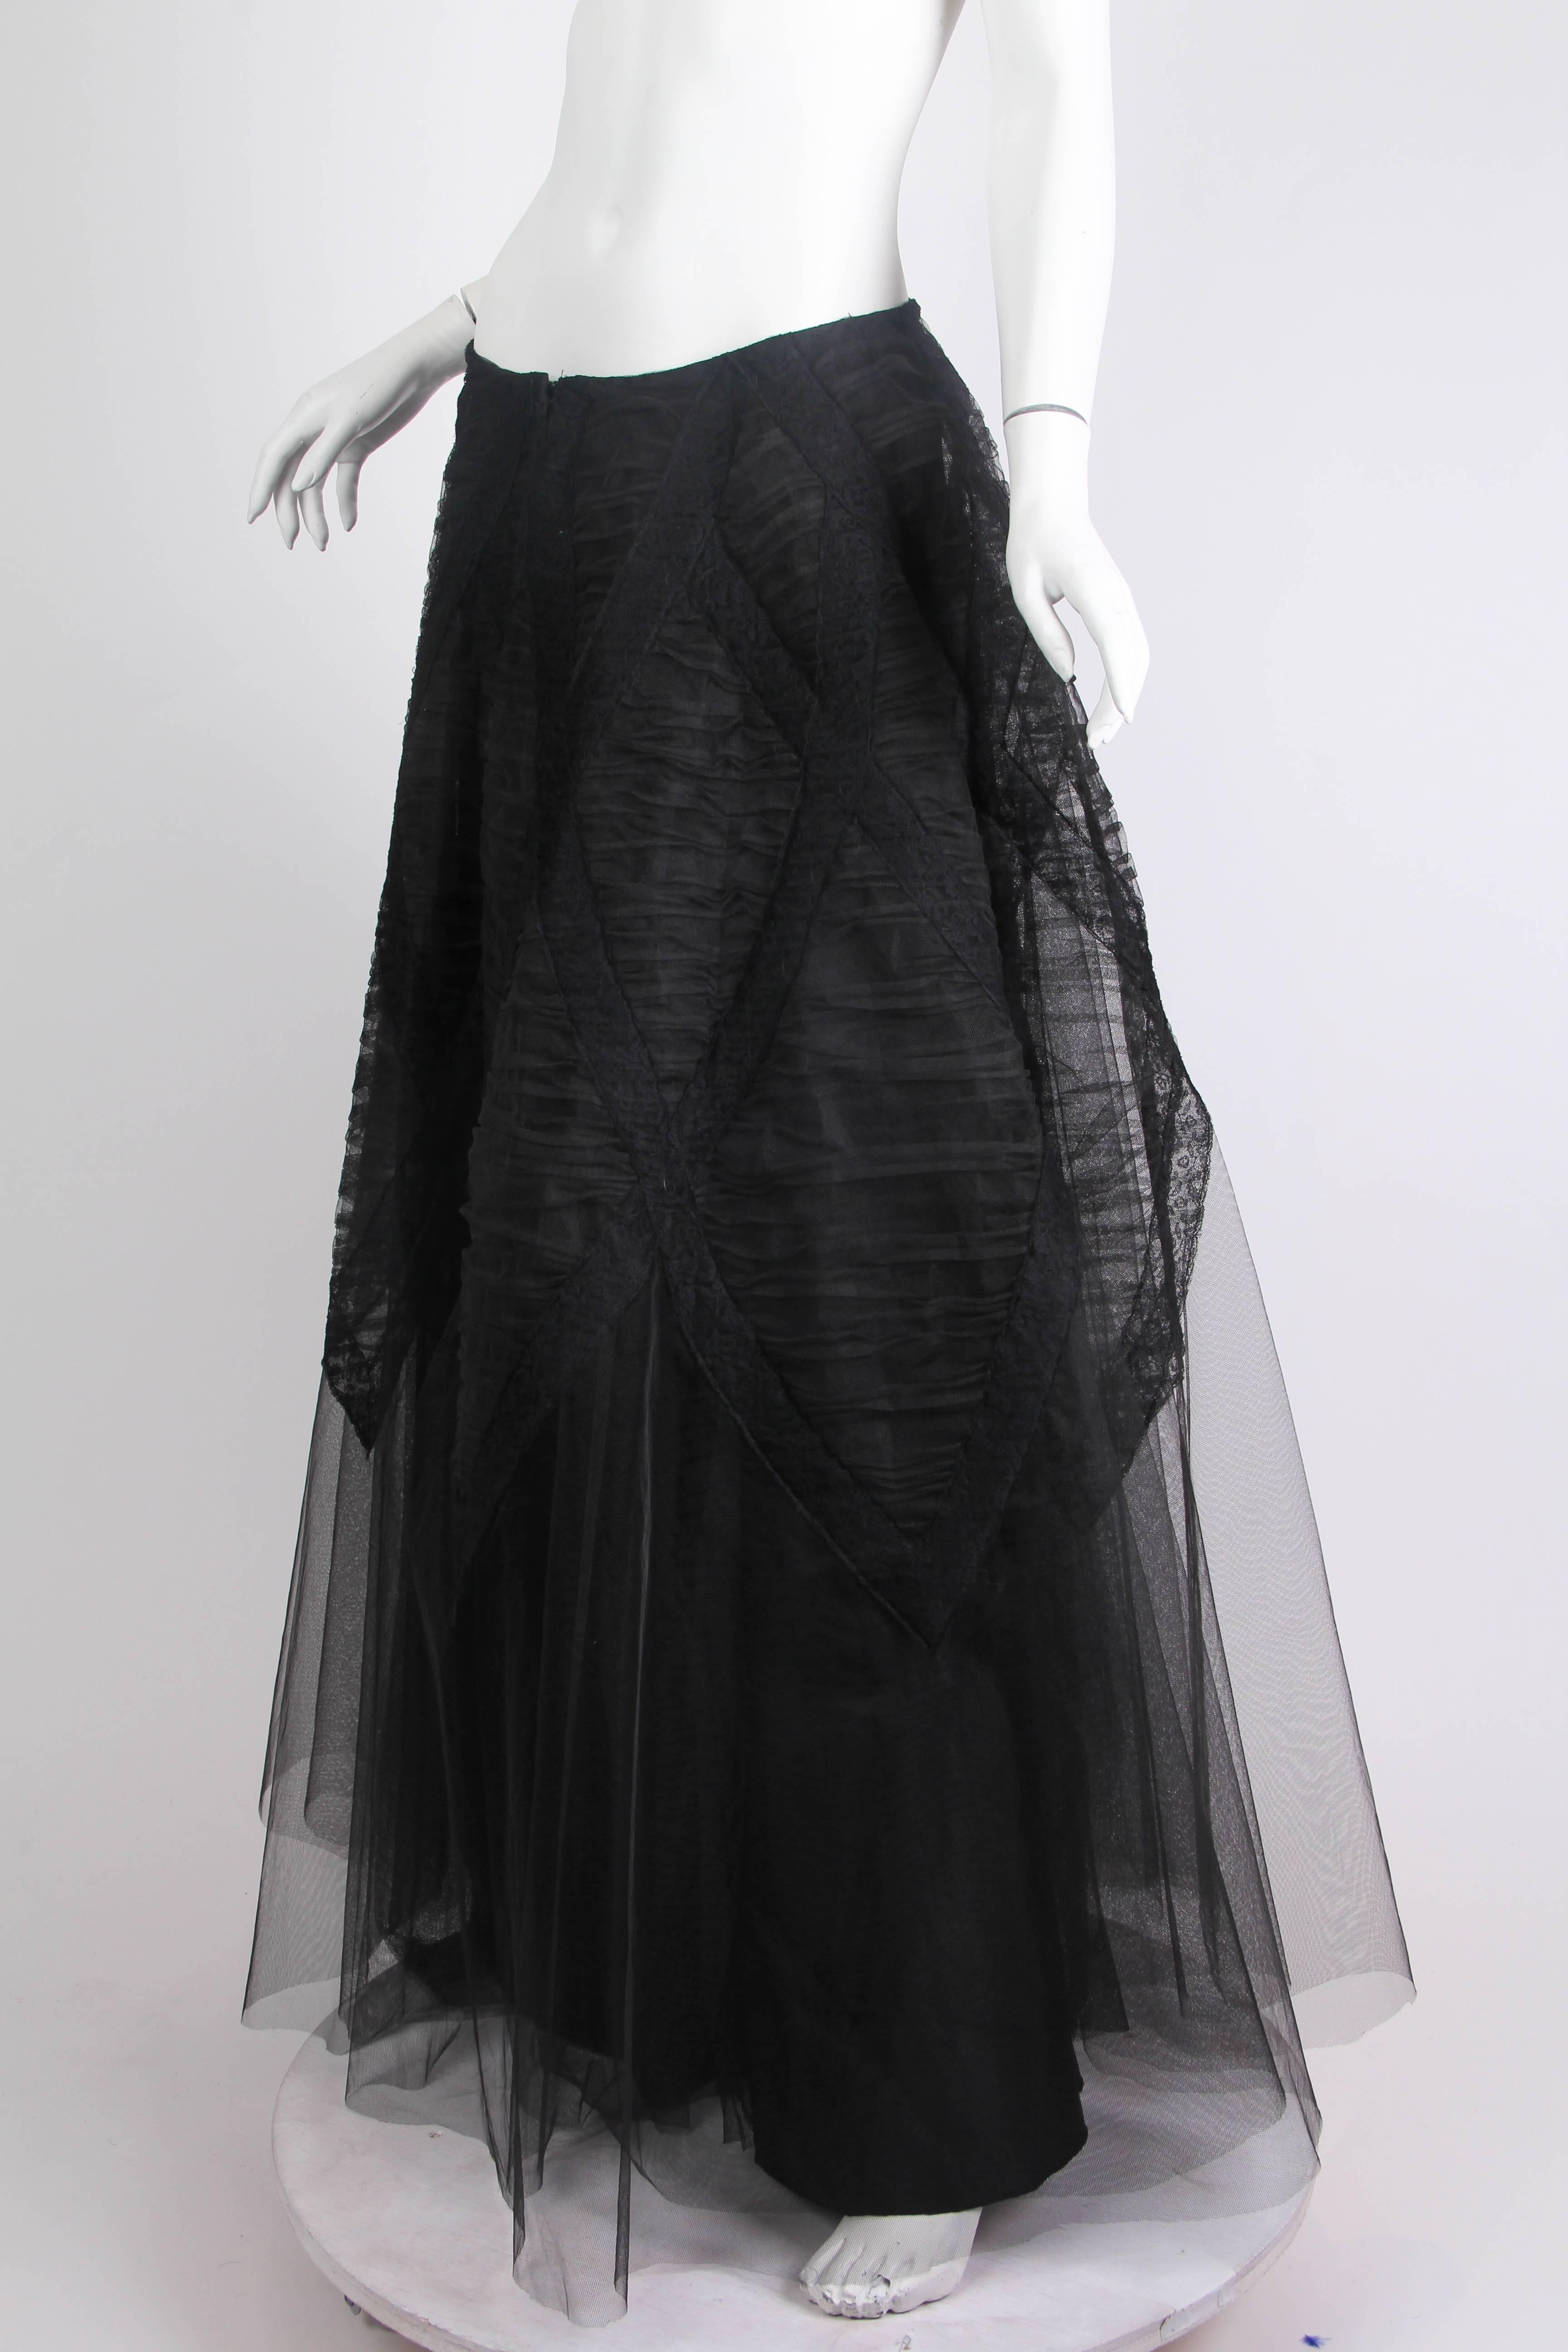 Black 1940s Tule and Chantilly Lace Ball Skirt